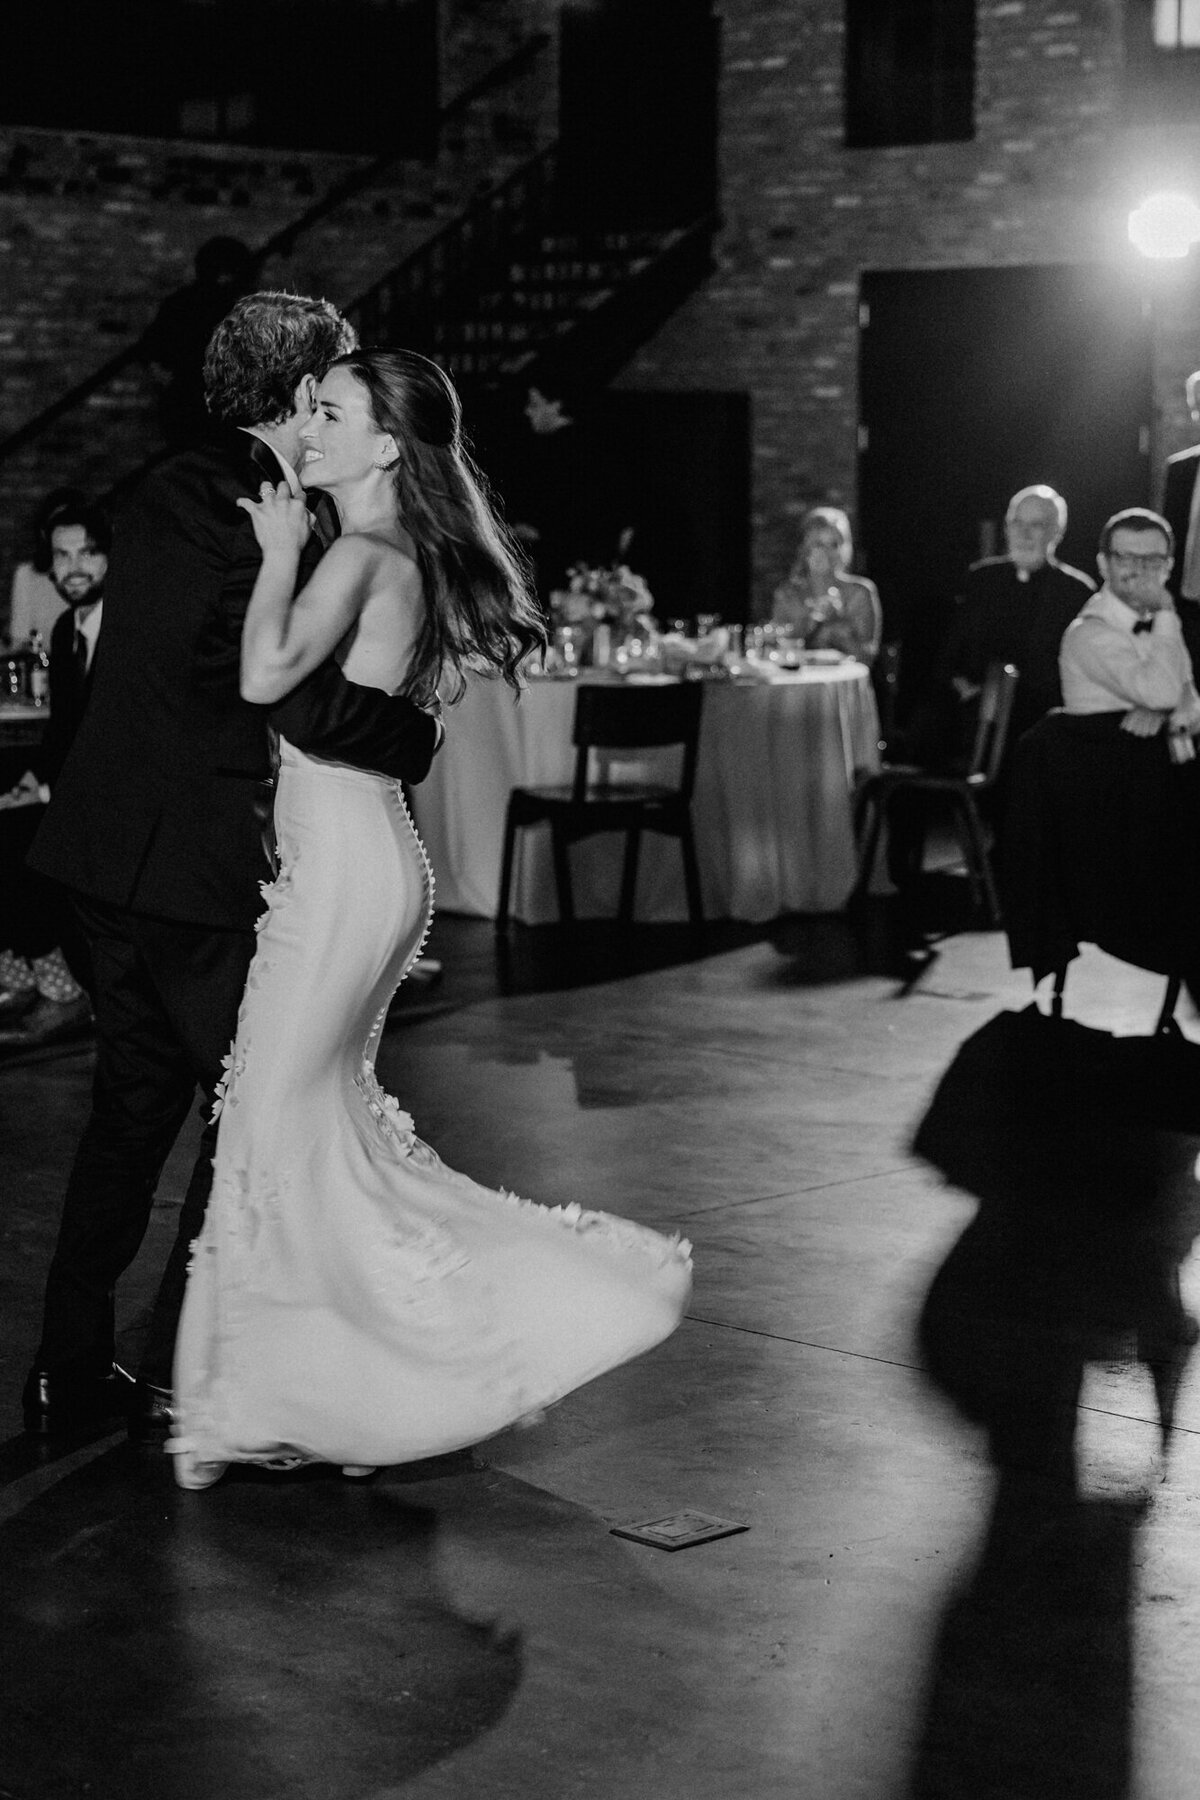 A father shares a dance with his daughter on her wedding day in Chicago